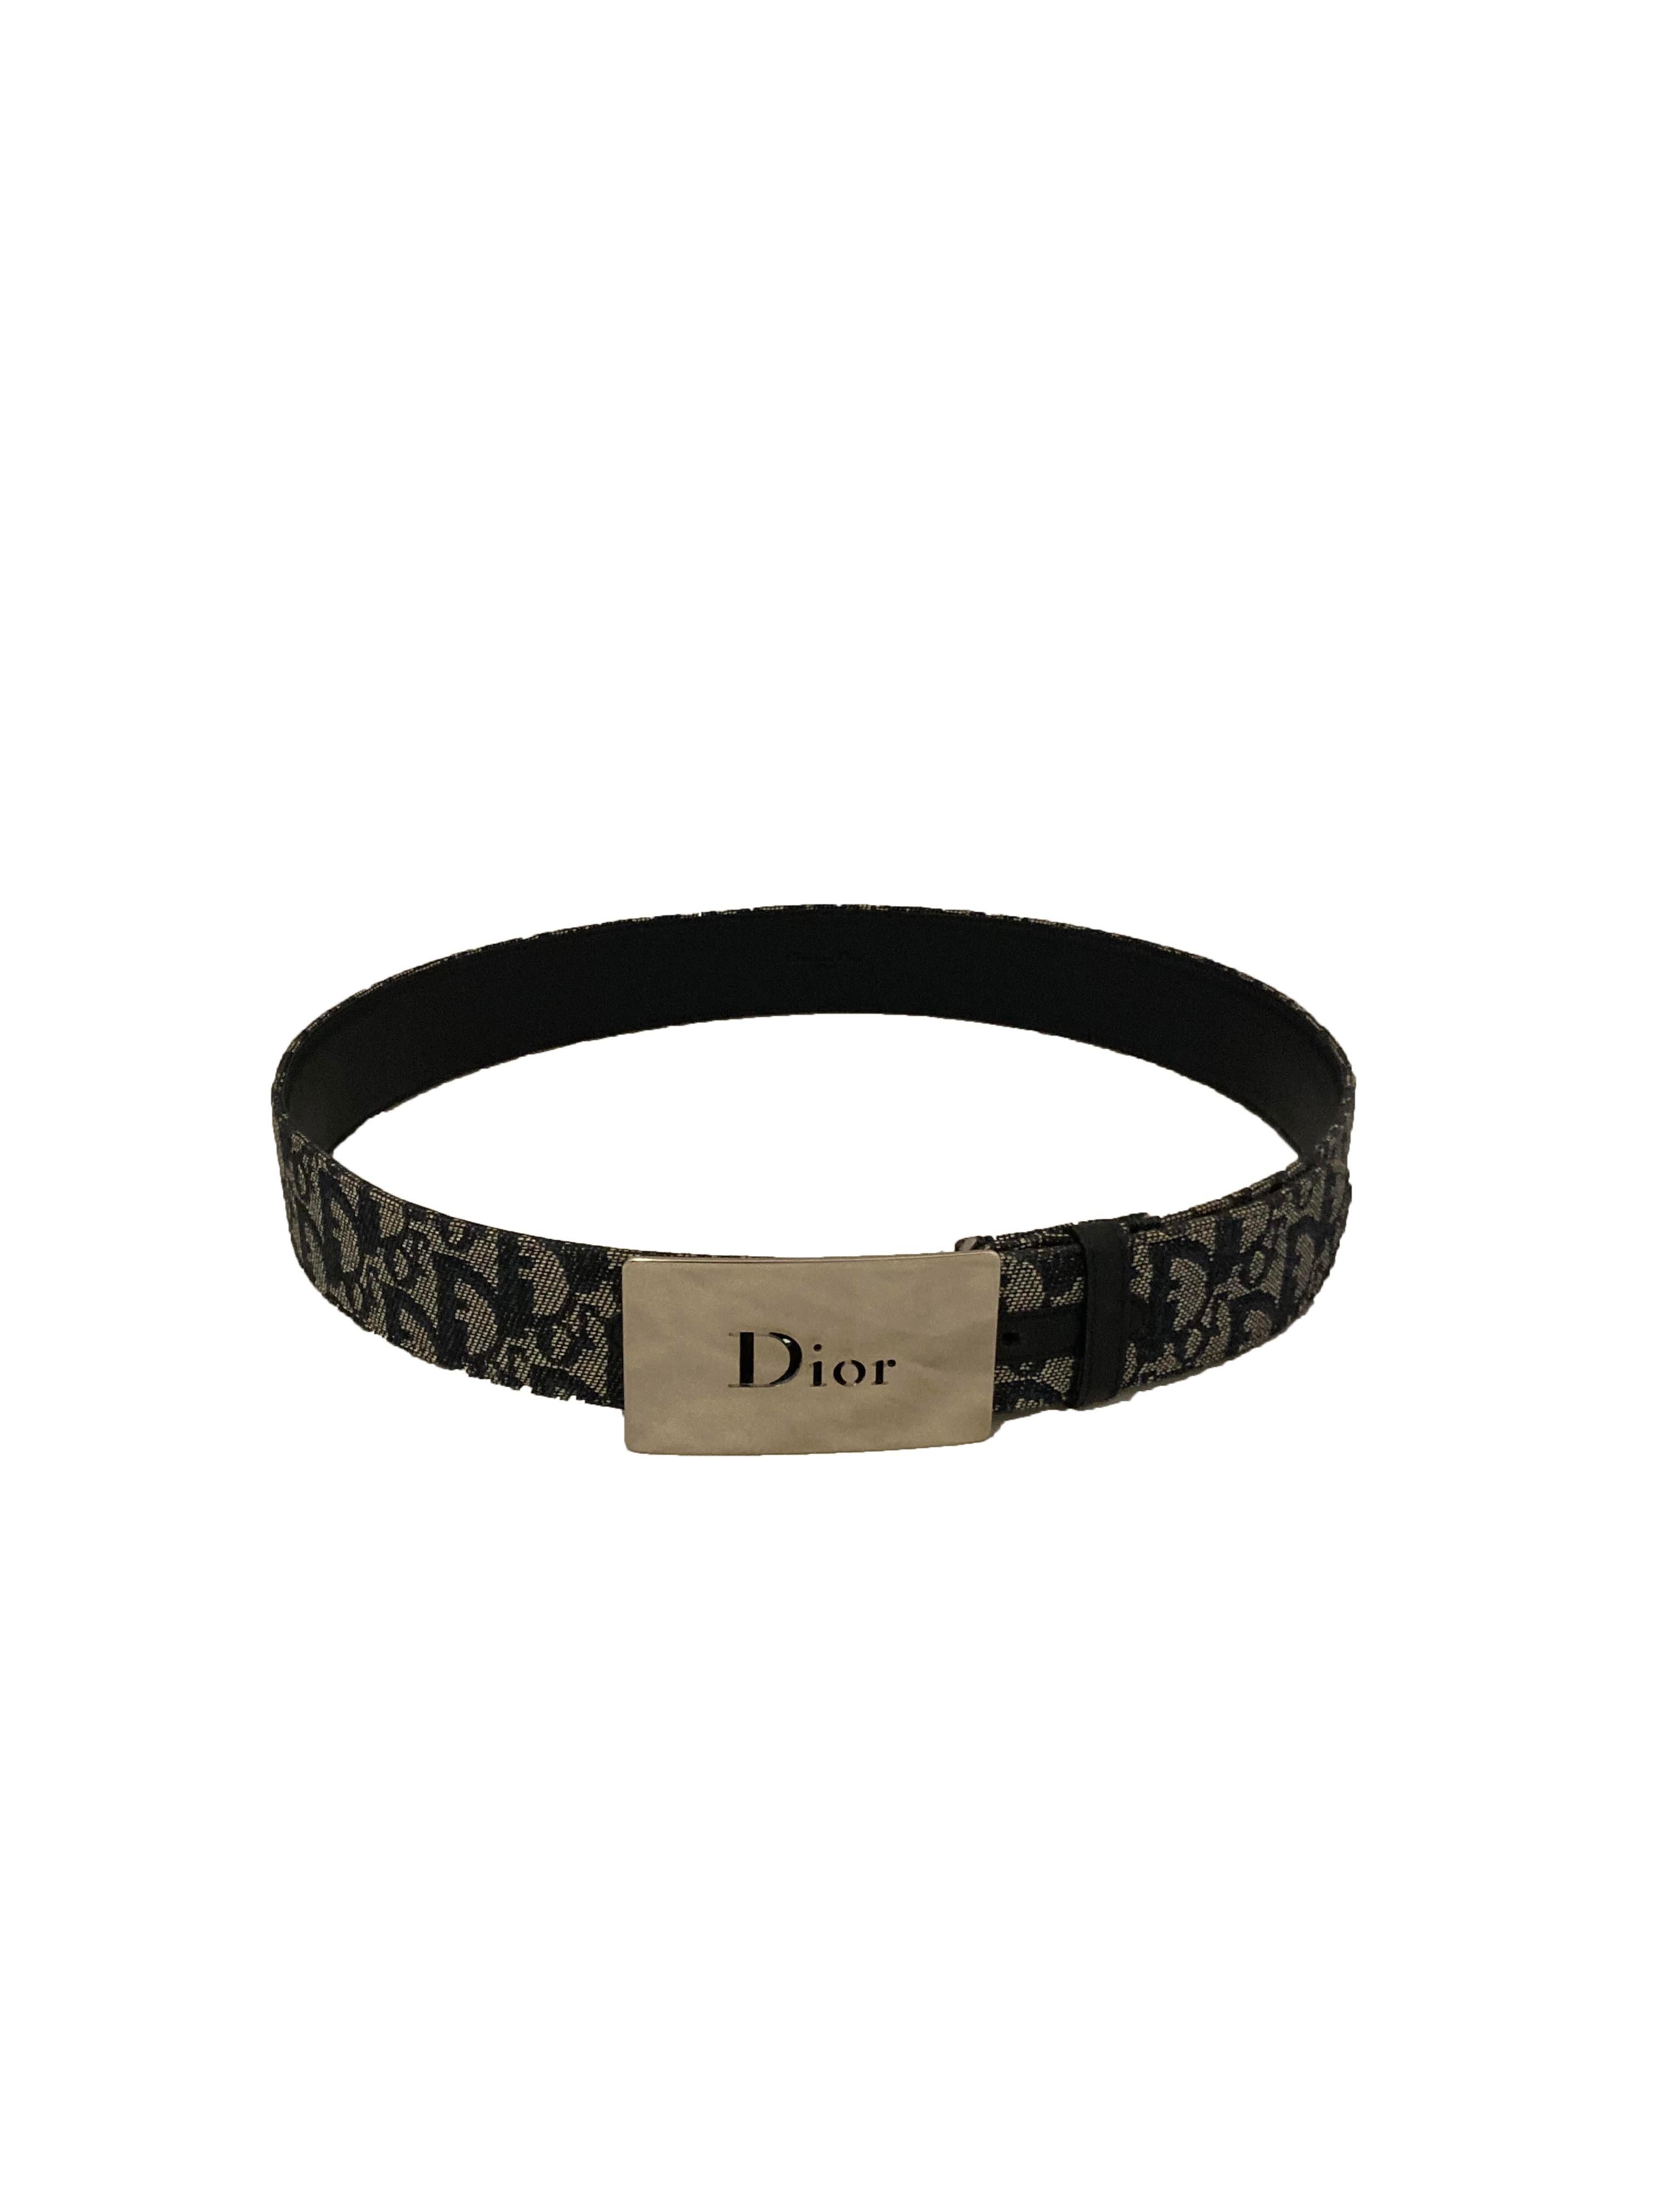 Vintage Oblique canvas belt from Dior. Ecru with navy stitching creating an all over 'Dior' motif. With rectangular silver toned metal buckle branded 'Dior' in cut out lettering. With nay leather belt loop and trim. Made in Italy. Marked size 90.